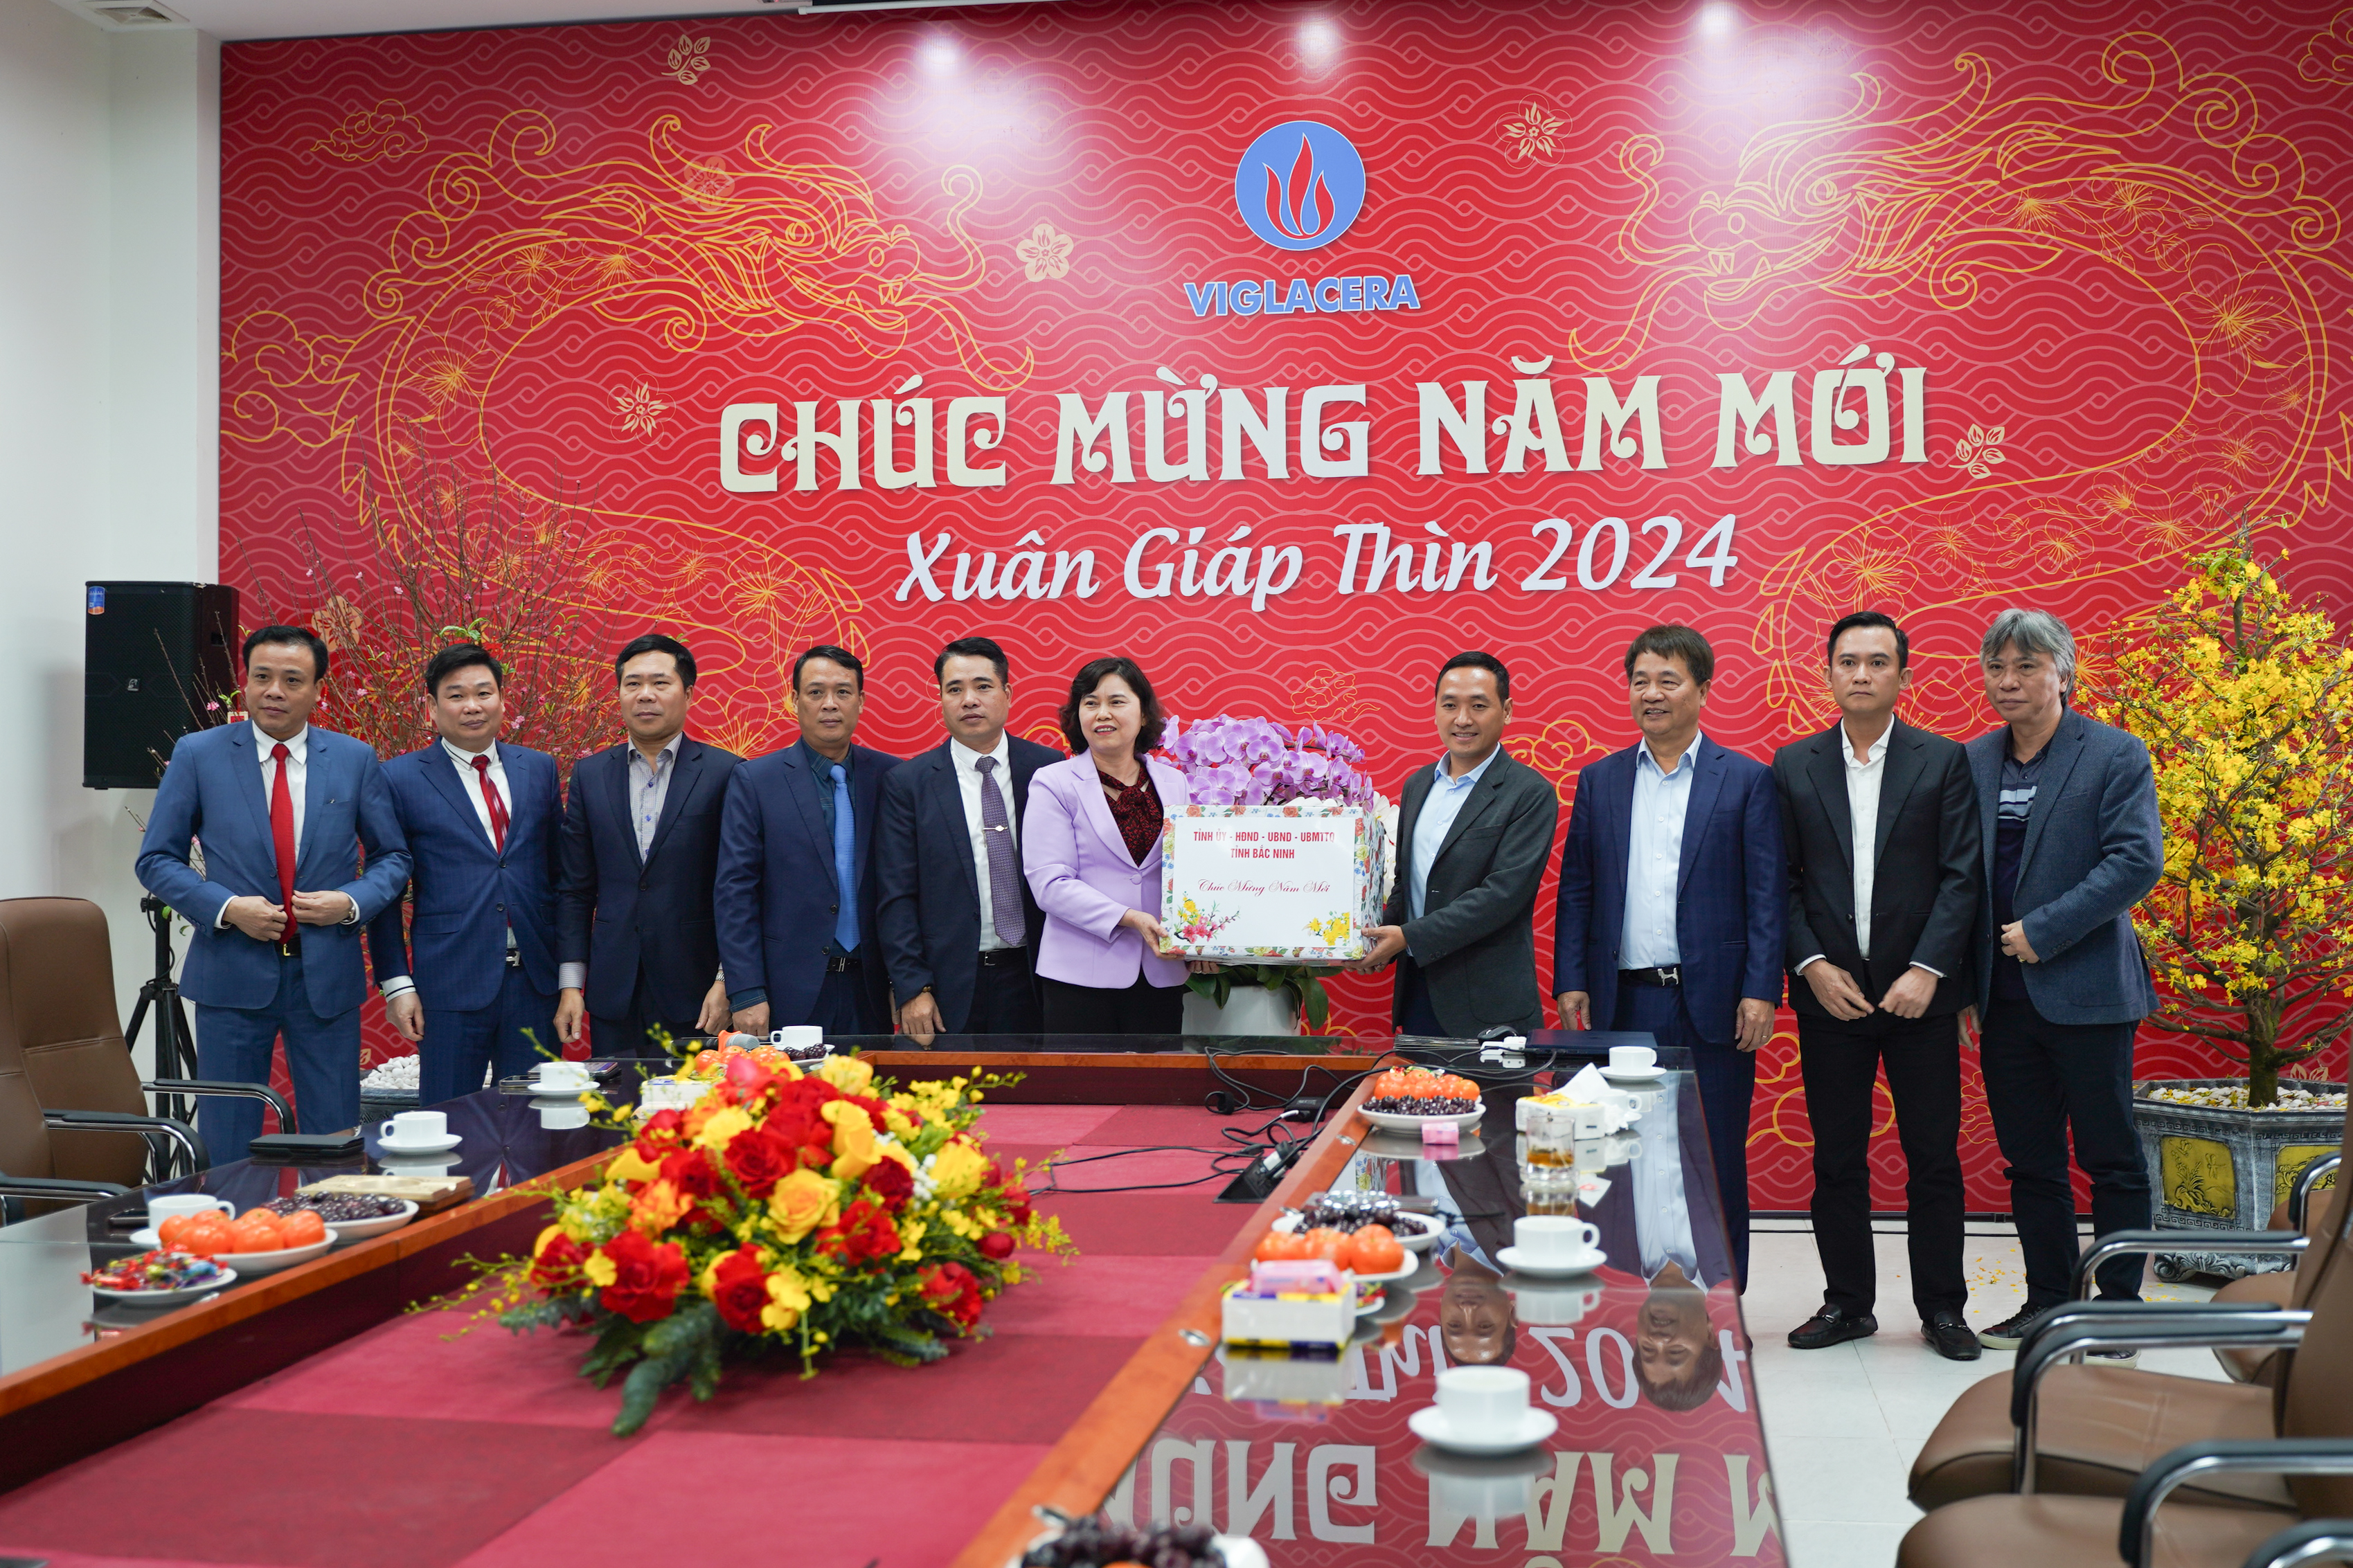 Viglacera Plants the Future with the Launch of THUAN THANH Eco-Smart IP in Bac Ninh province